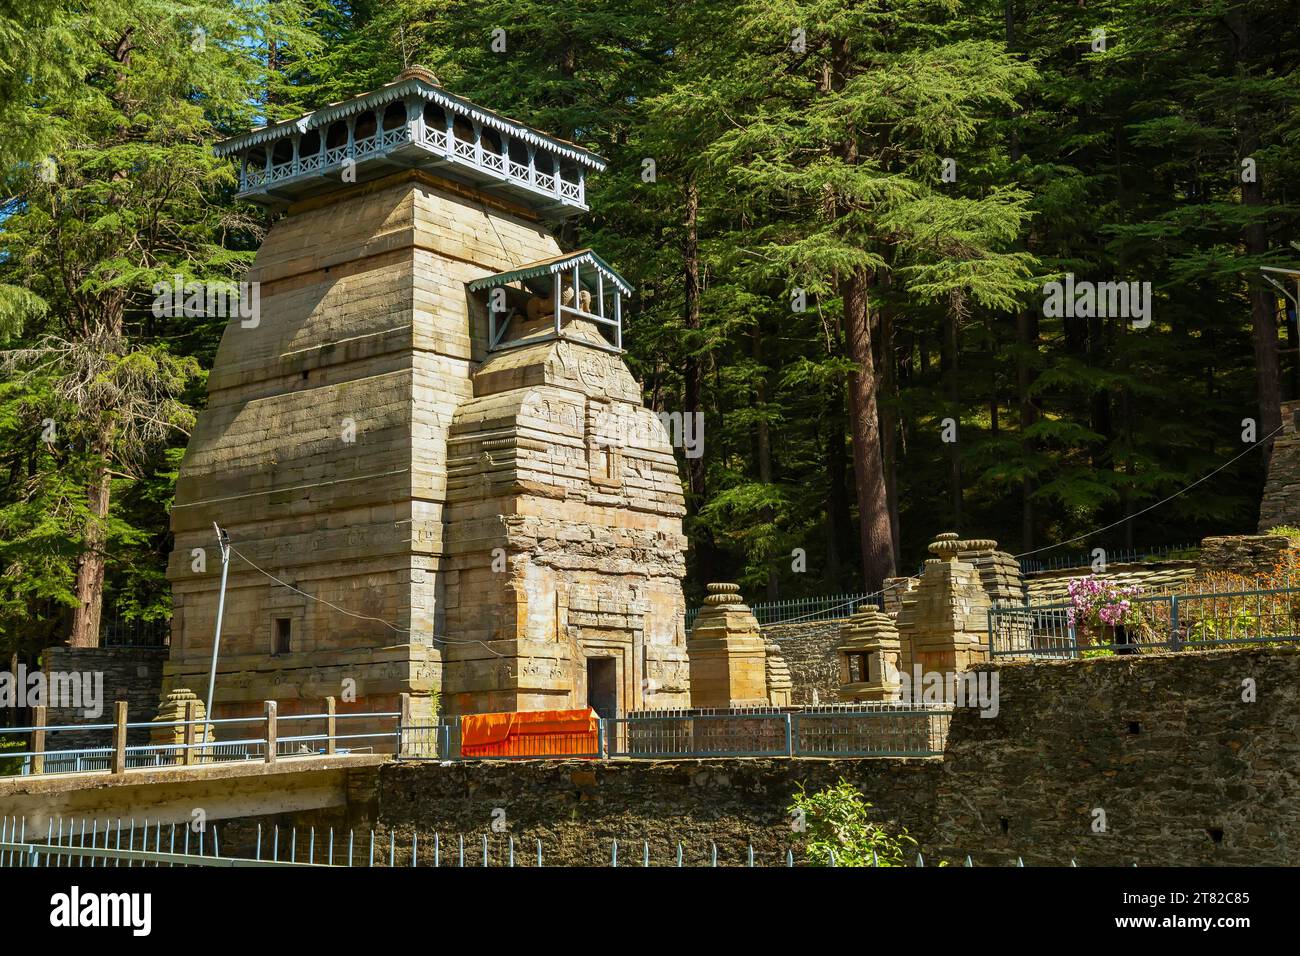 Jageshwar Dham in Uttarakhand, An ancient land of temples and gods Stock Photo